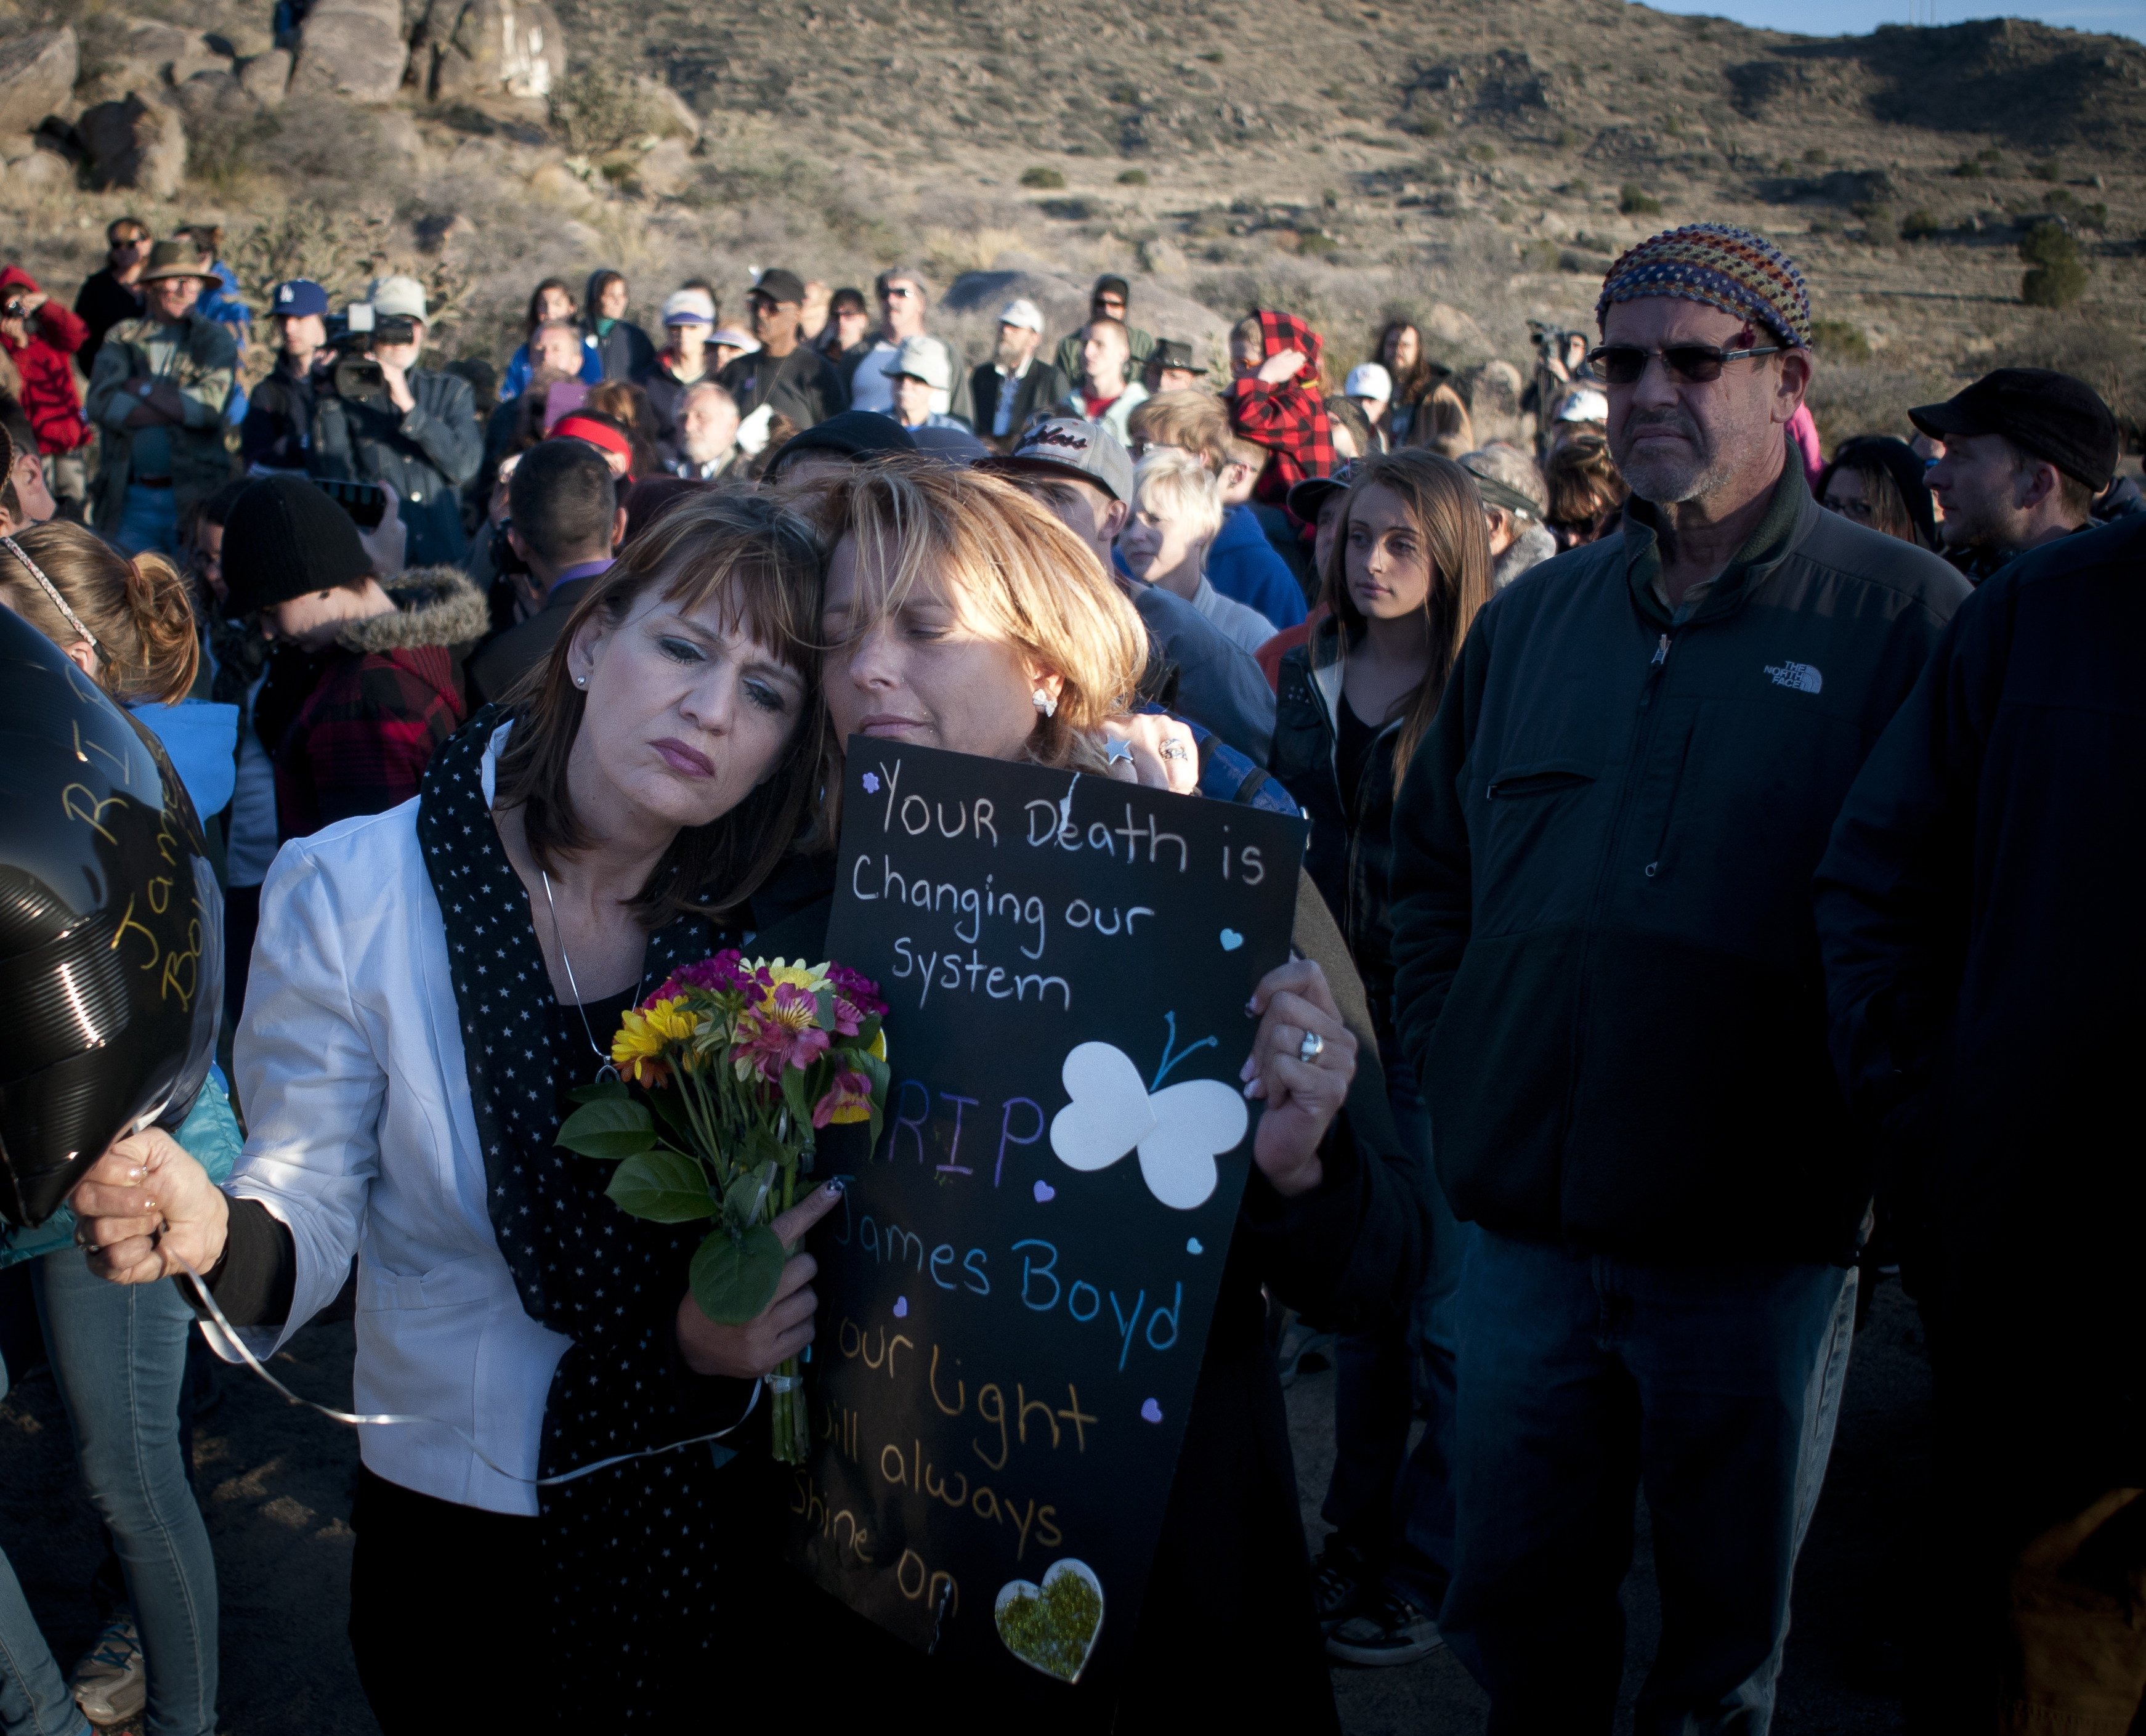 Star Garrett, left, and Shannon Haley, second from left, embrace during the vigil for James Boyd in the foothills near U-Mound in Albuquerque, April 2, 2014. (Marla Brose—Albuquerque Journal/ZUMA Press)